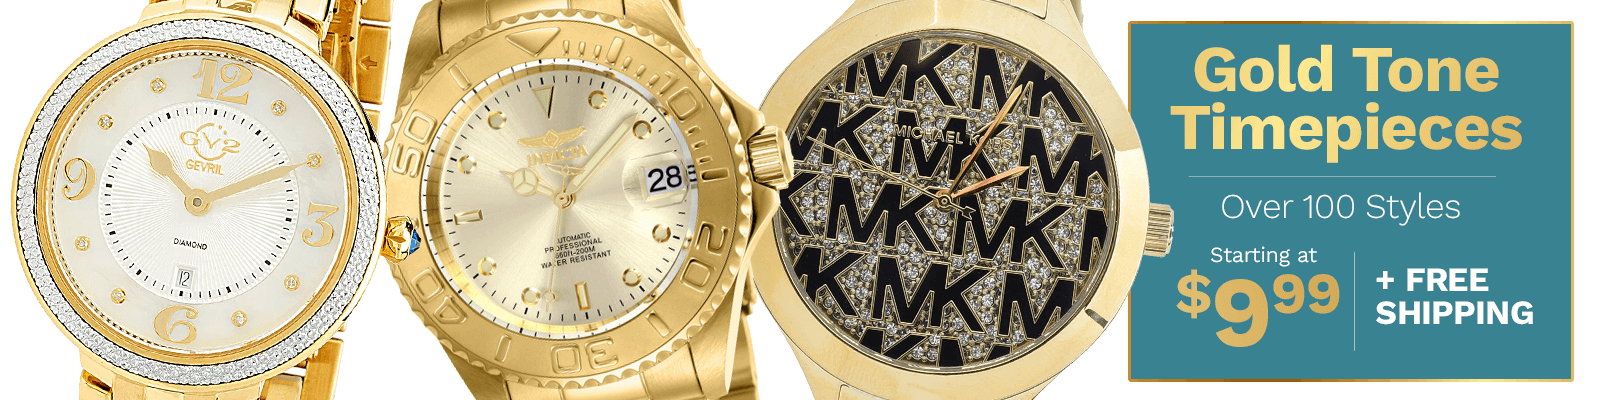 Gold Tone Timepieces  Over 100 Styles Starting at $9.99 + Free Shipping 912-762 659-733  928-371